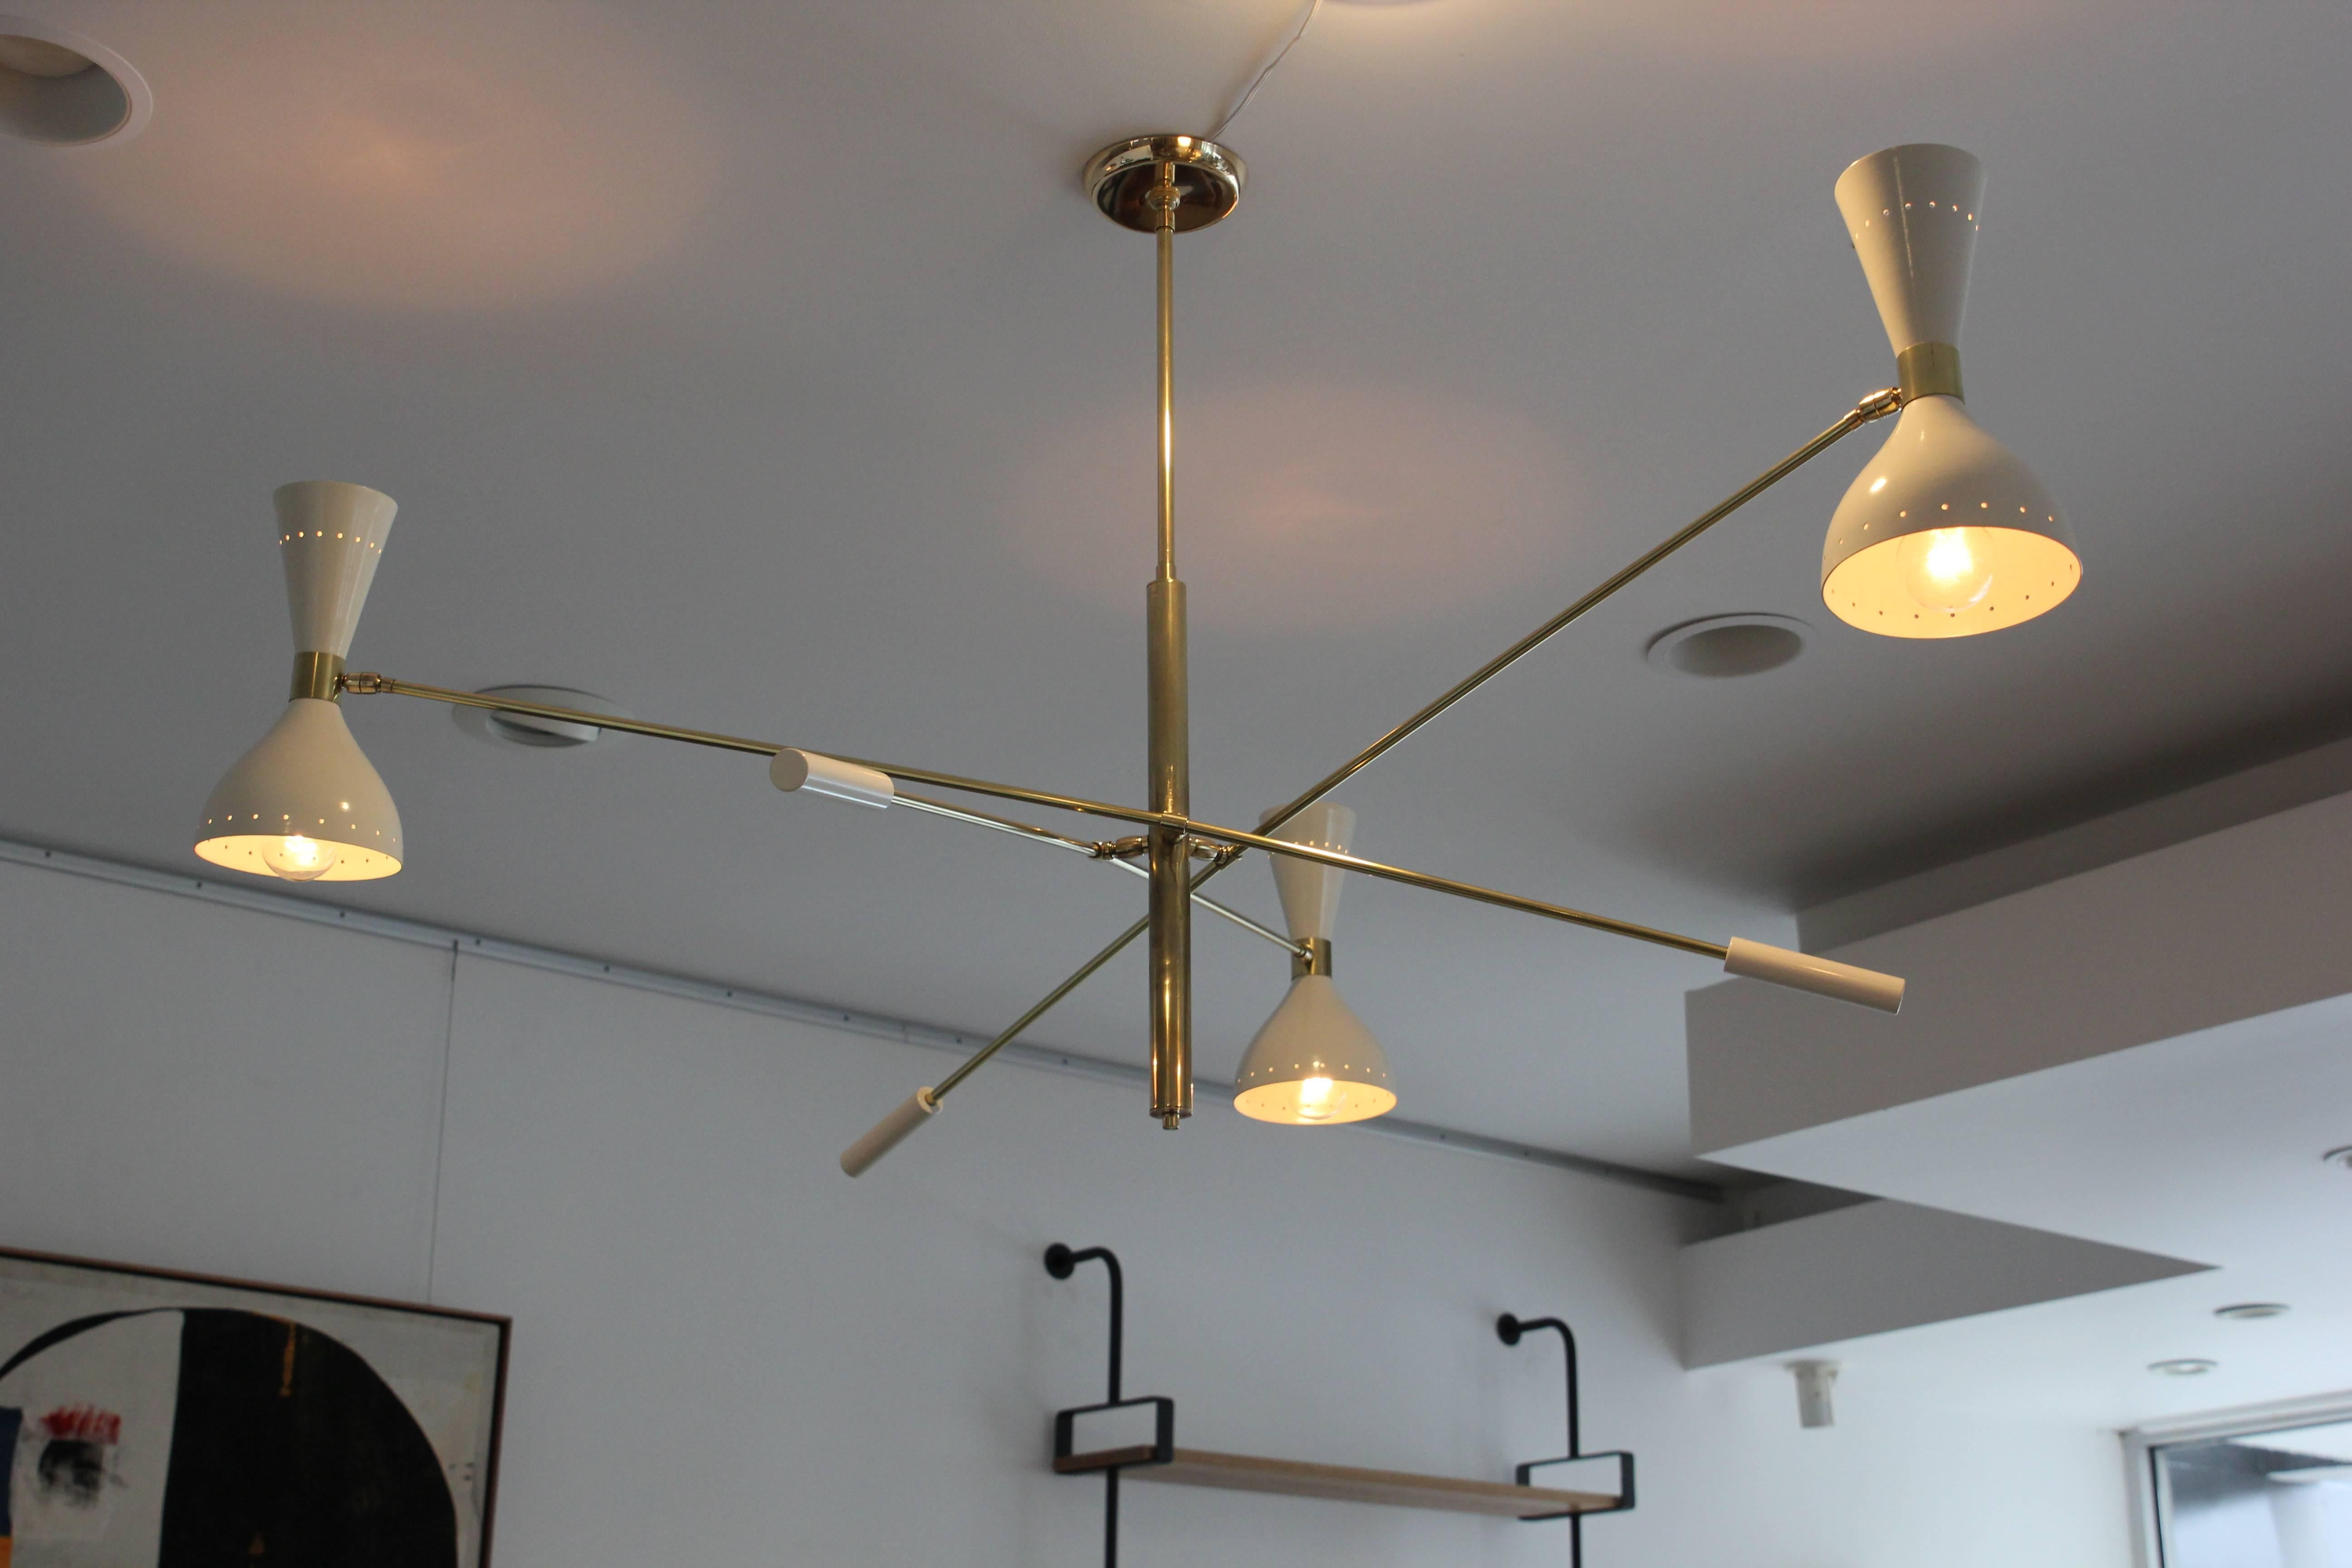 Large-scale three-armed ceiling light in style of Stilnovo with white cone articulating shades and brass arms.
Newly produced in Italy and newly rewired.